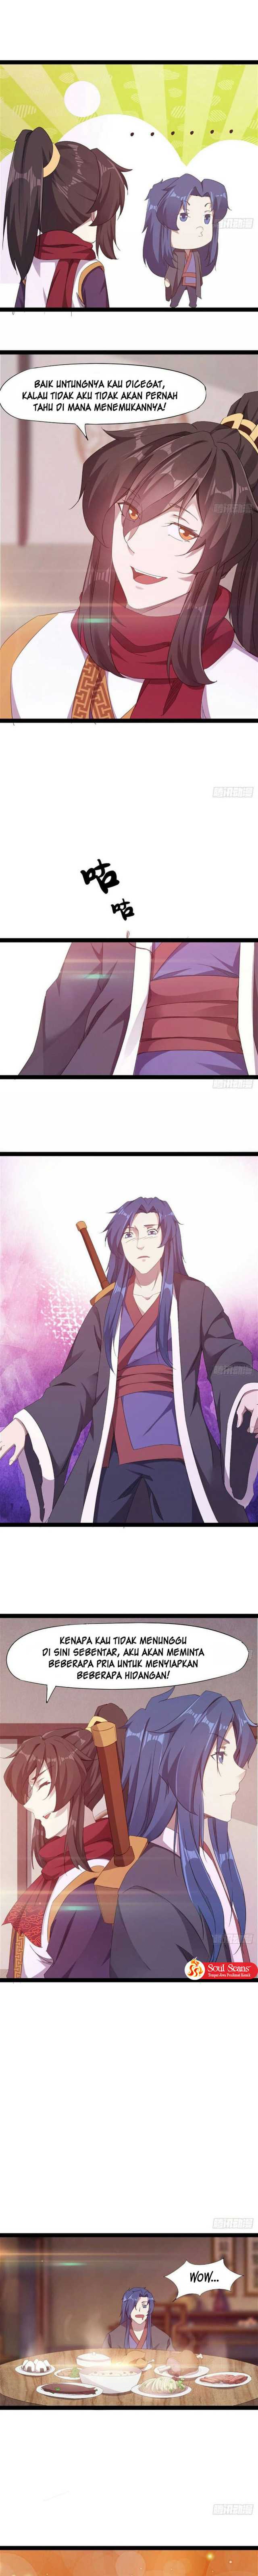 Path of the Sword Chapter 24